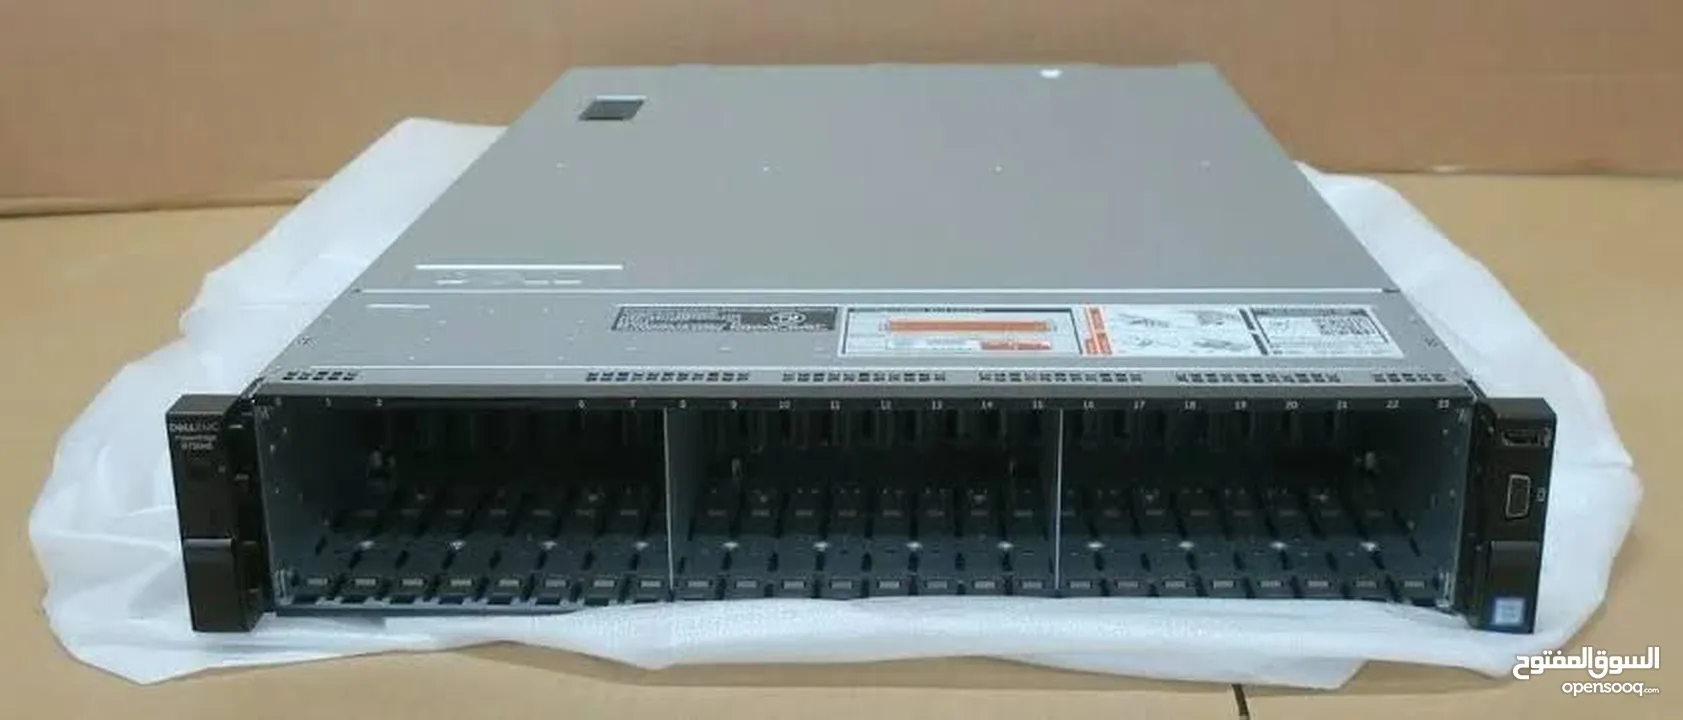 DELL R730XD (26bay×2.5inch) pairpon